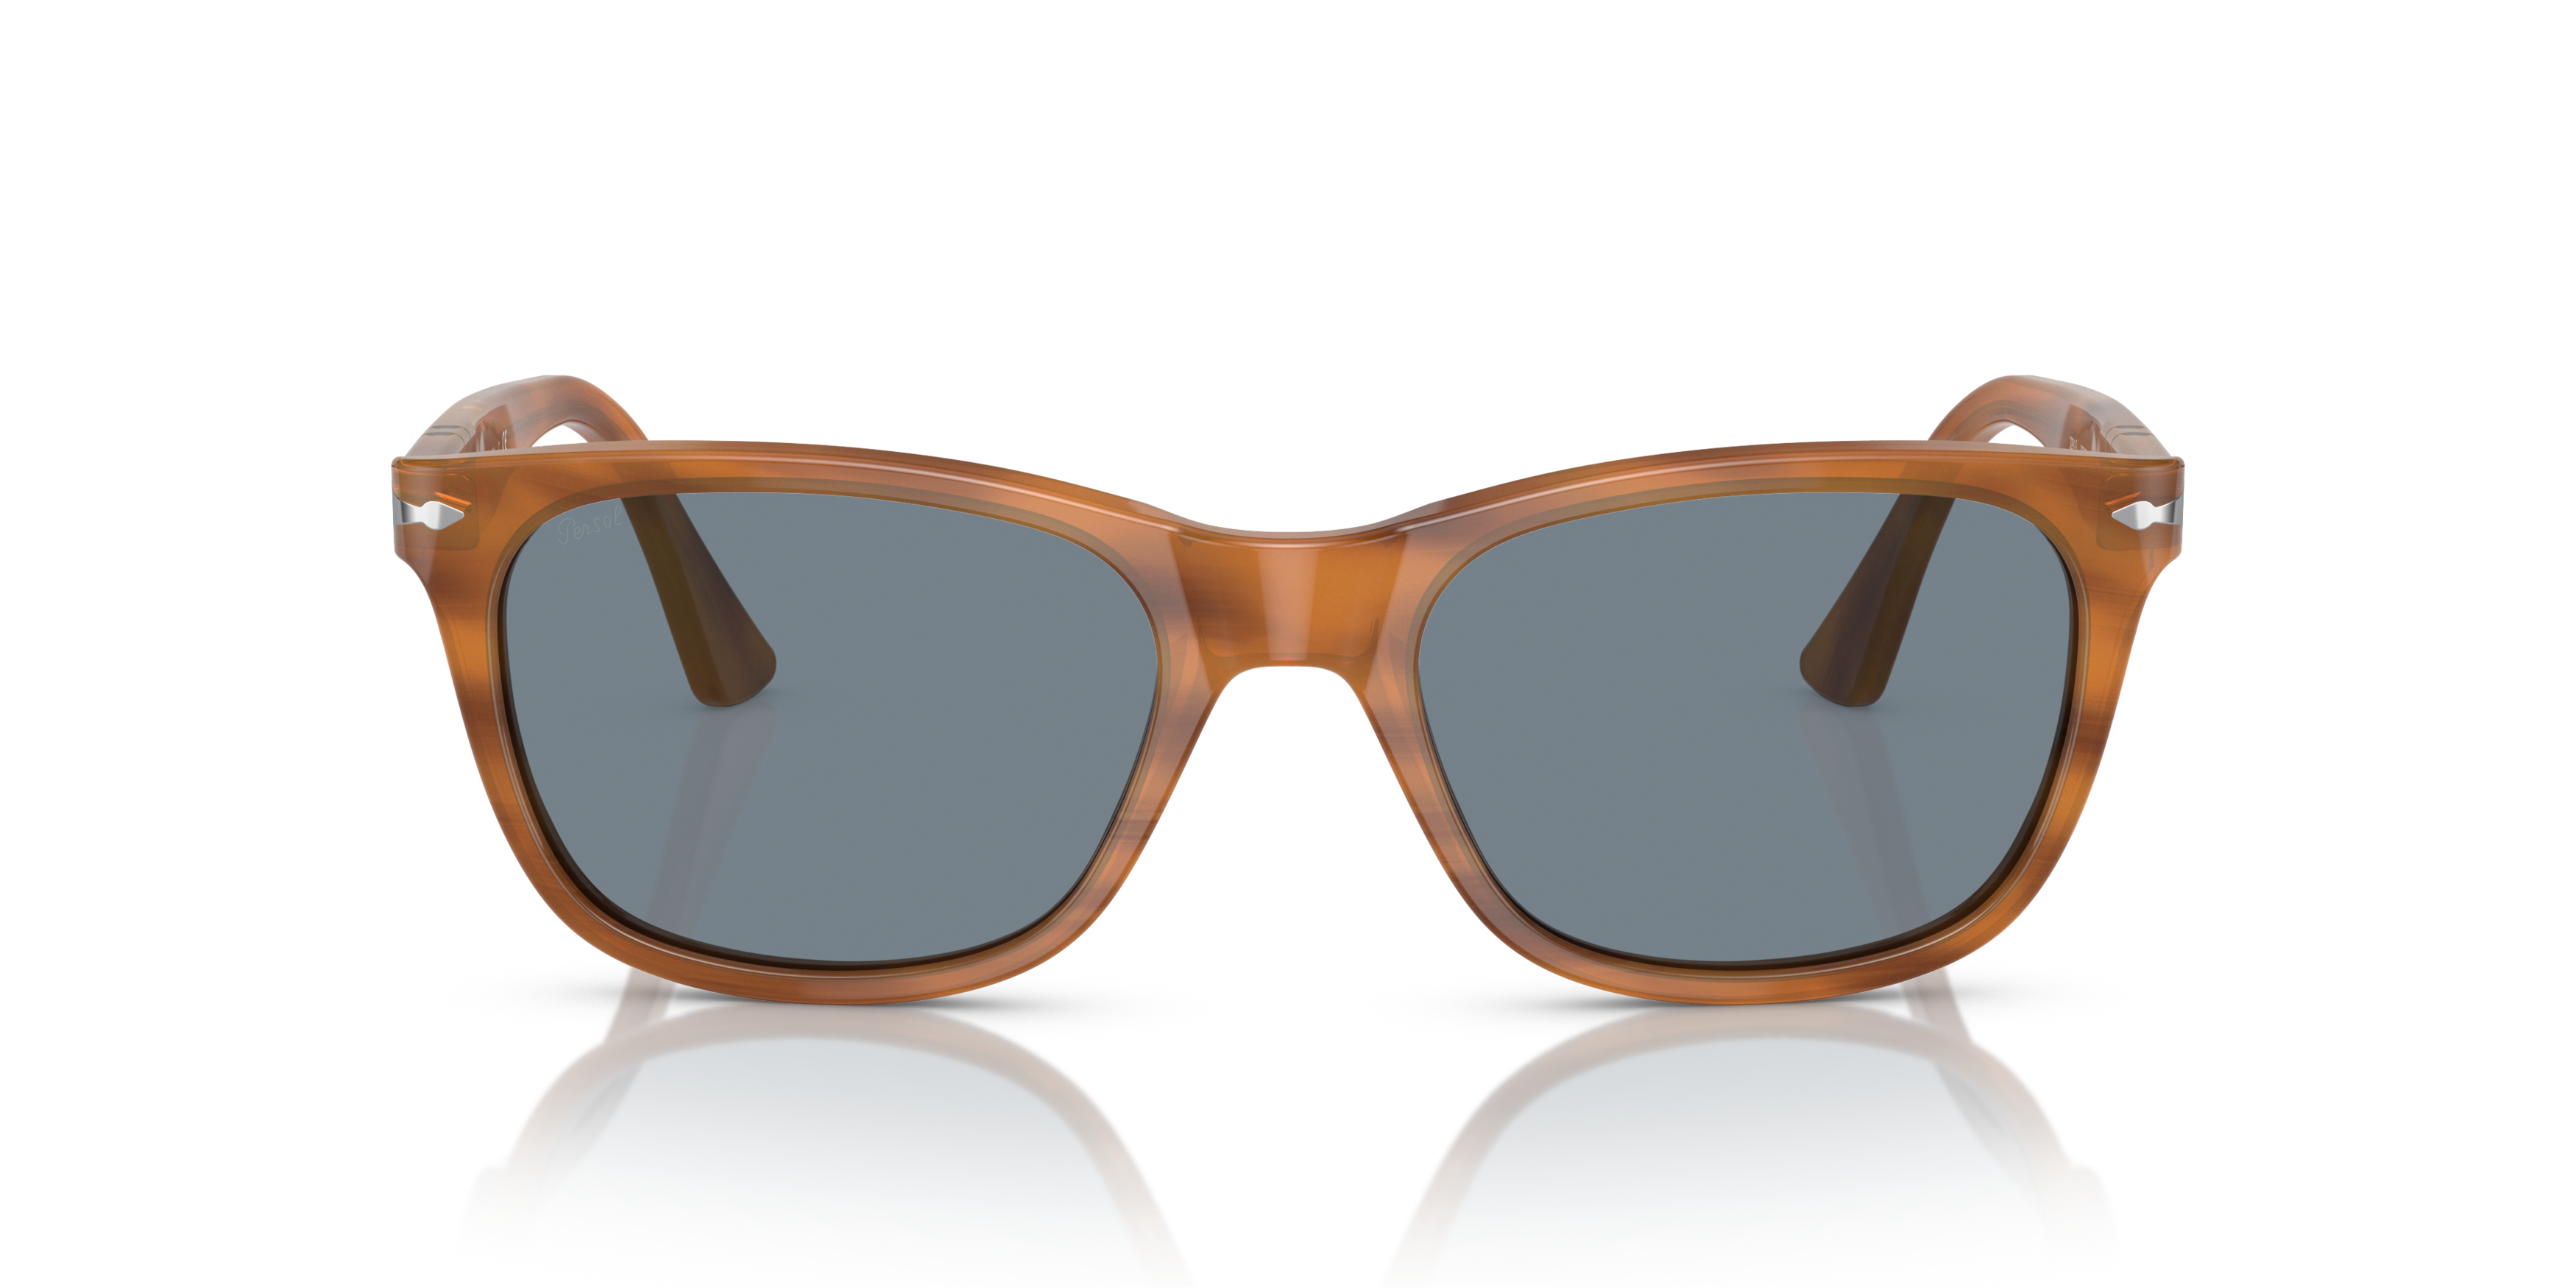 [products.image.front] Persol PO3291S 960/56